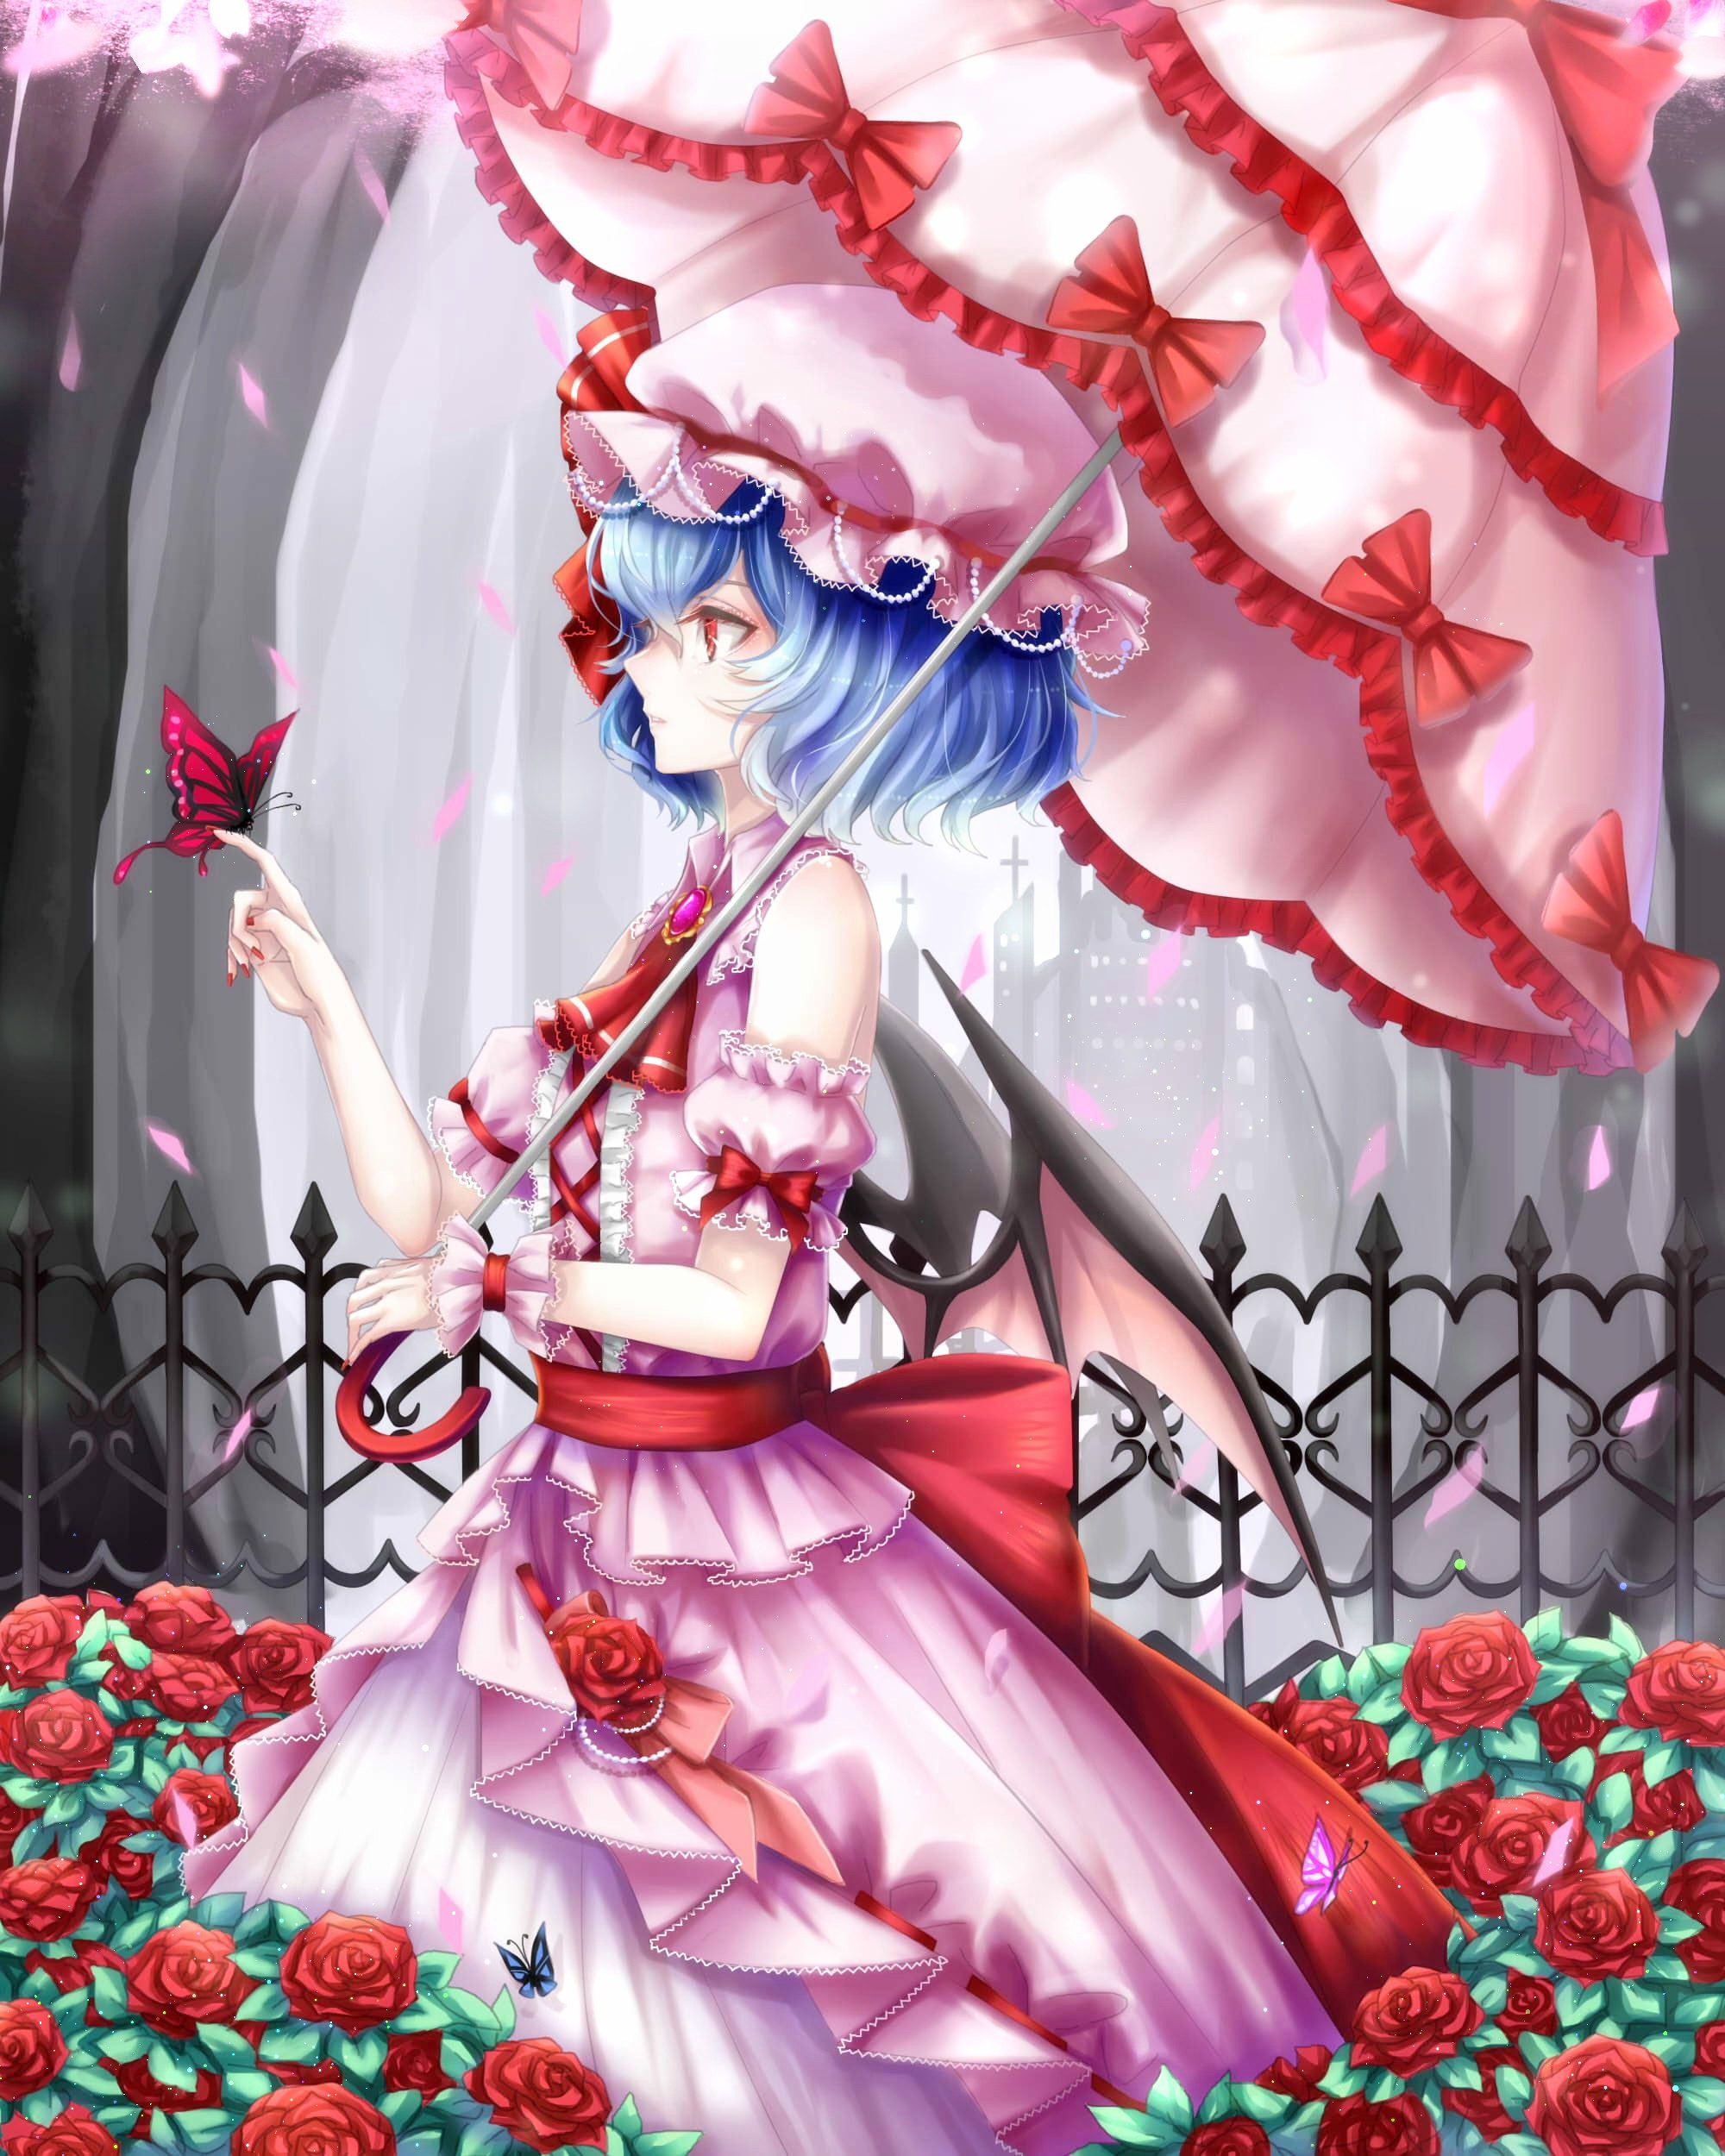 Anime 2000x2500 anime anime girls Touhou Remilia Scarlet dress wings blue hair women with umbrella umbrella butterfly insect animals flowers rose red flowers Pixiv